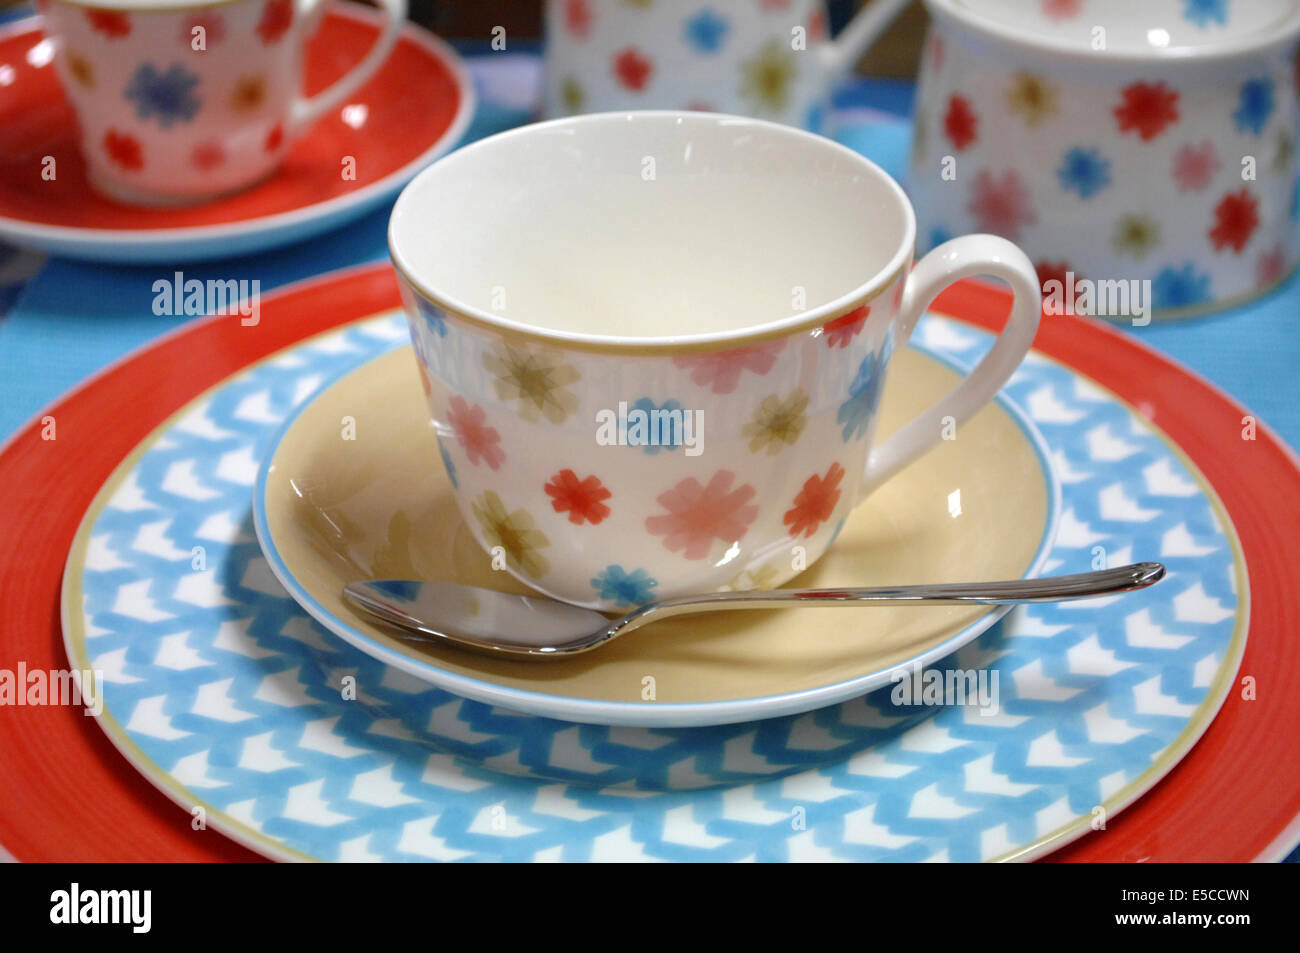 Cup and saucer with teaspoon from the Villeroy & Boch Lina tableware pattern. Stock Photo